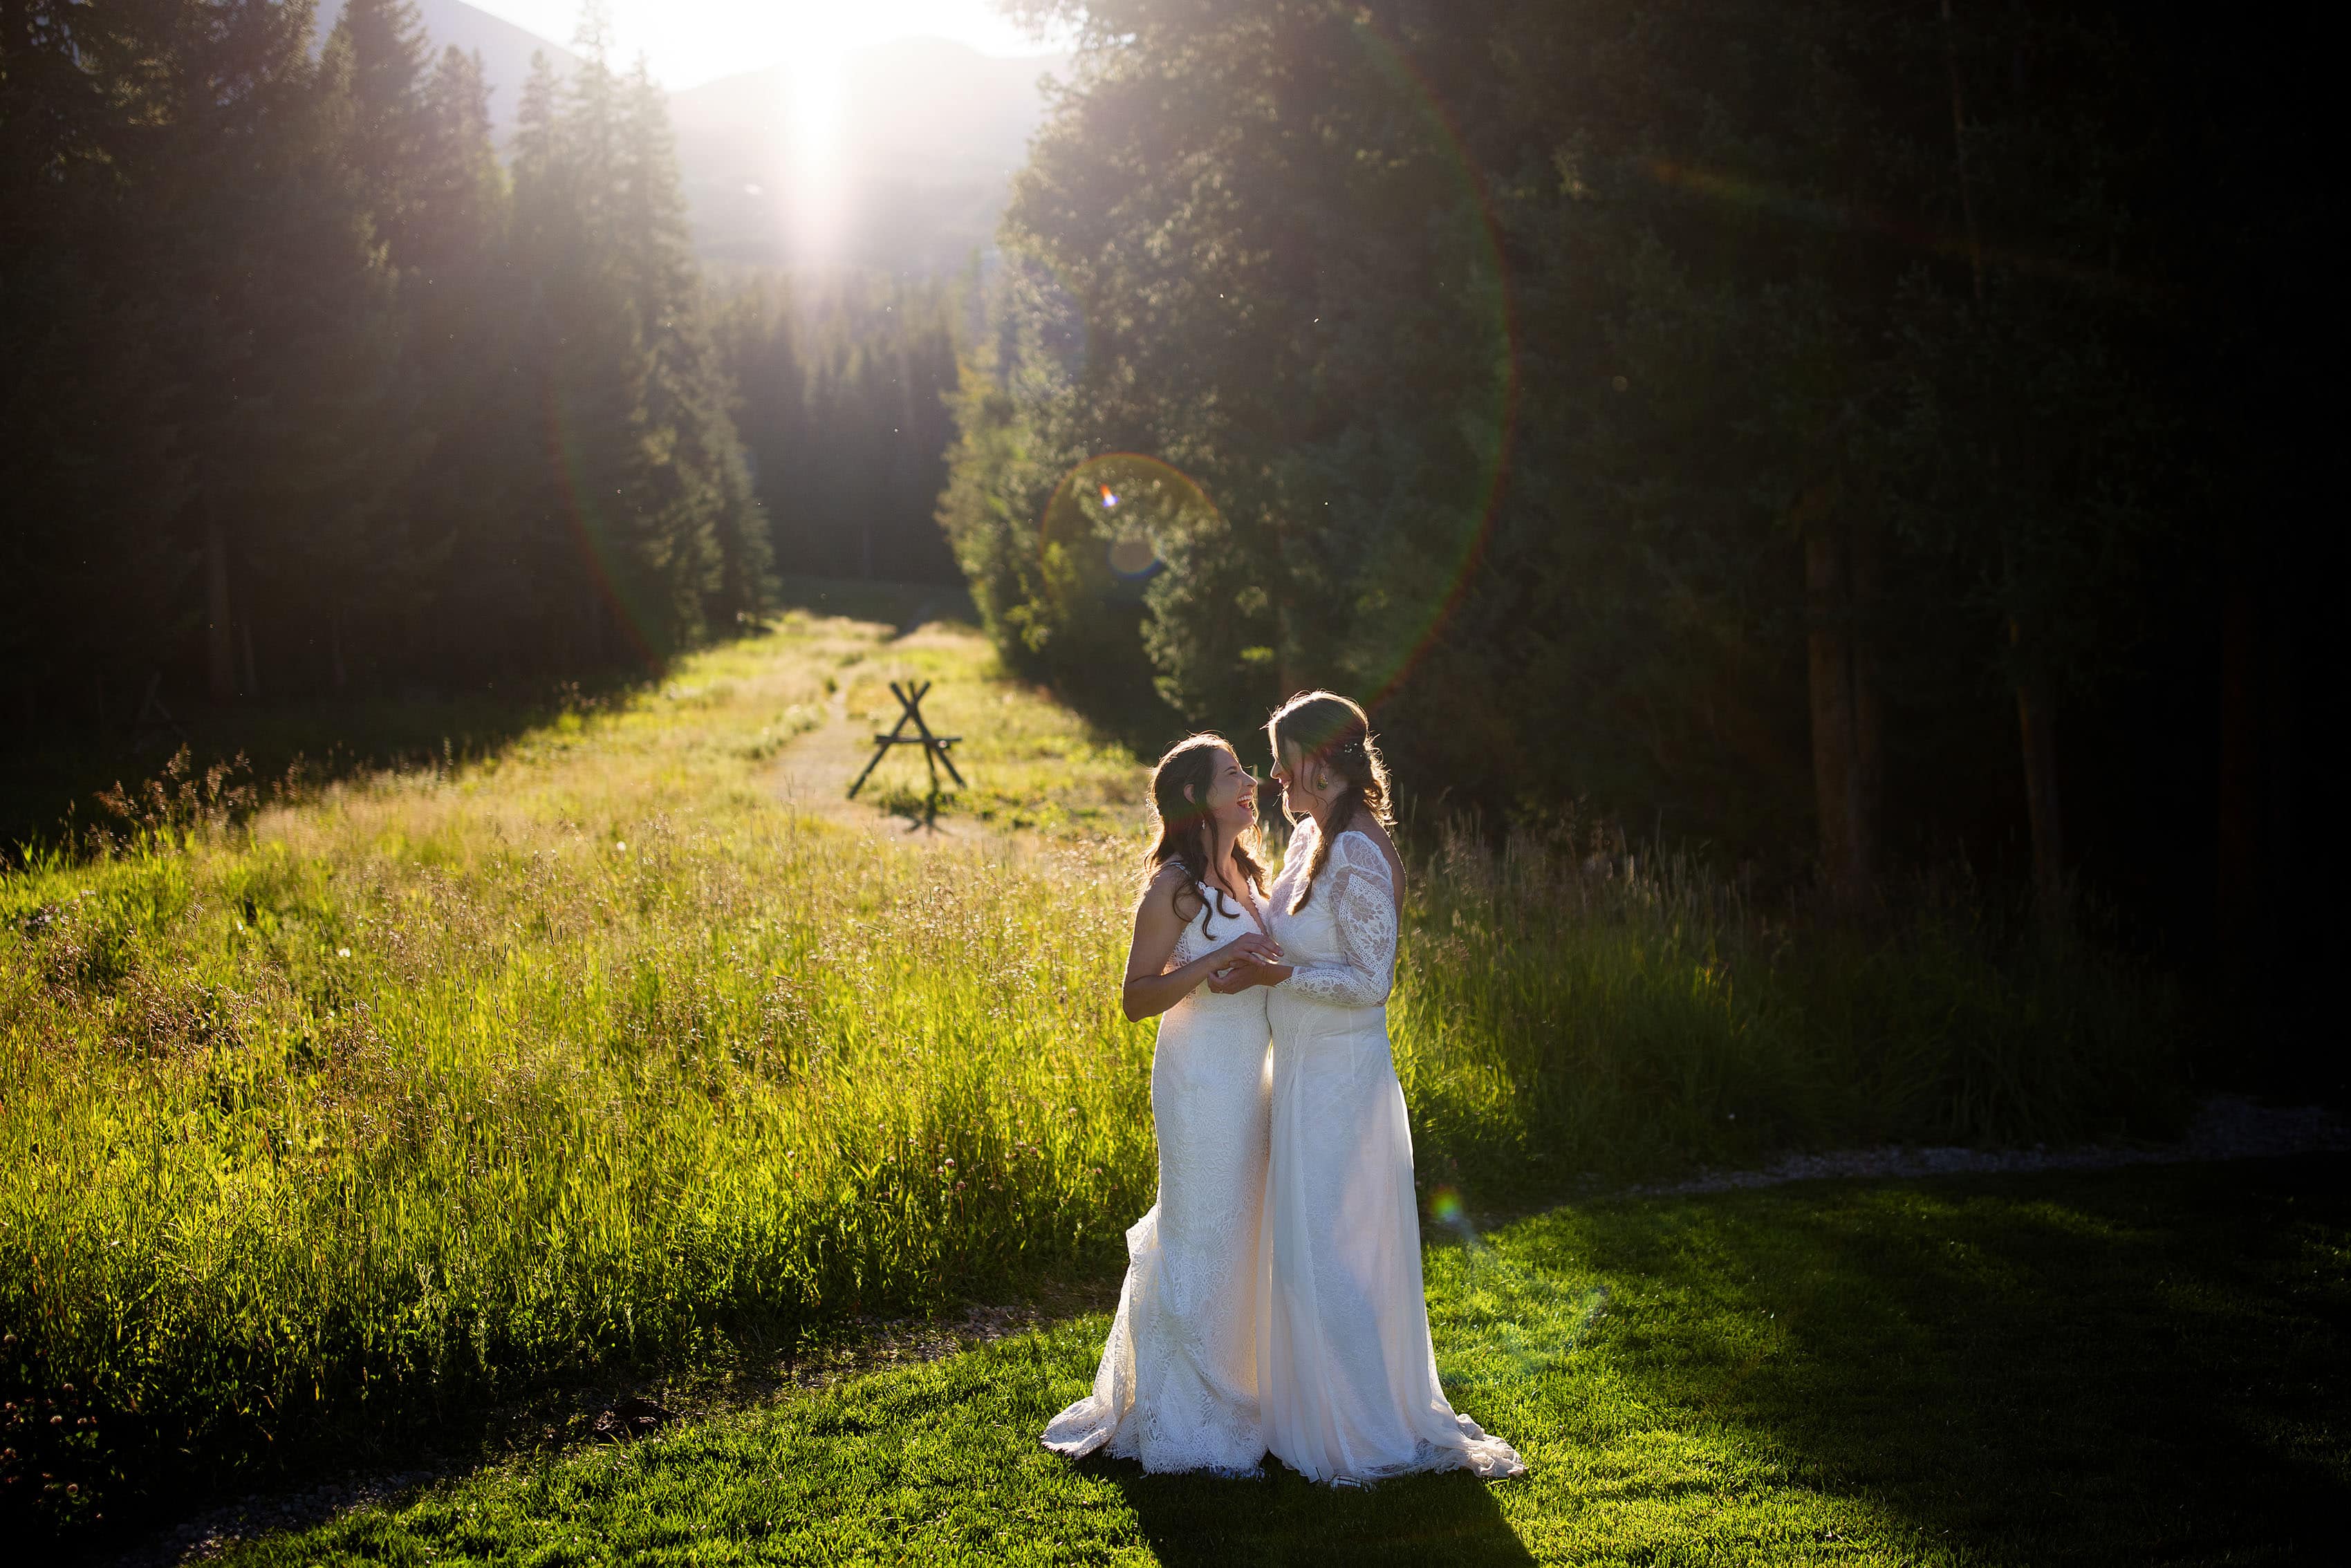 The newlyweds pose near a meadow in Breckenridge